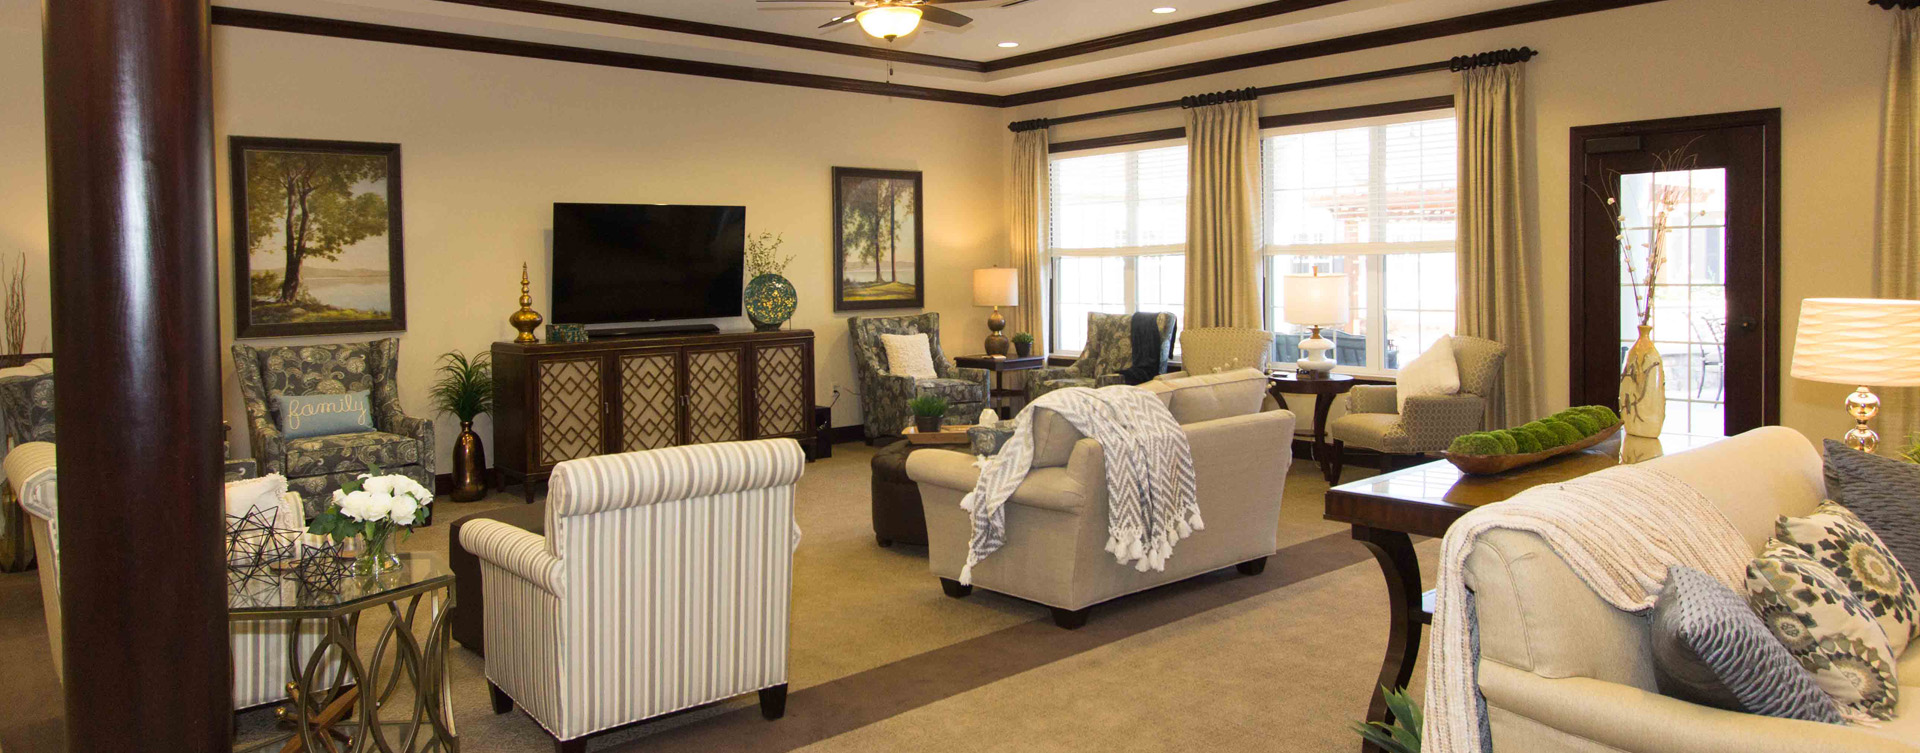 Socialize with friends in the living room at Bickford of Gurnee